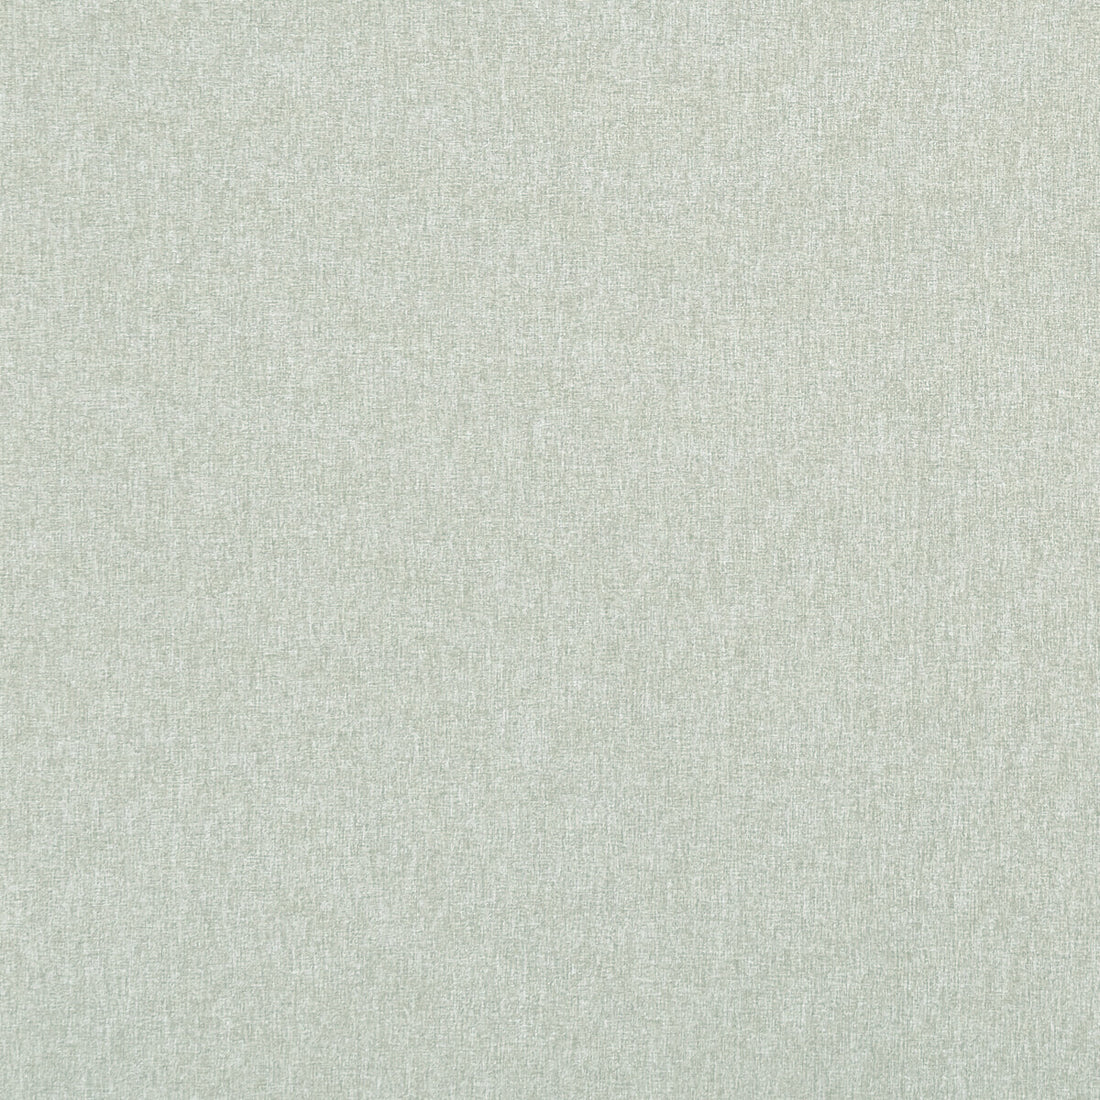 Highlander fabric in eggshell color - pattern F0848/11.CAC.0 - by Clarke And Clarke in the Clarke &amp; Clarke Highlander collection